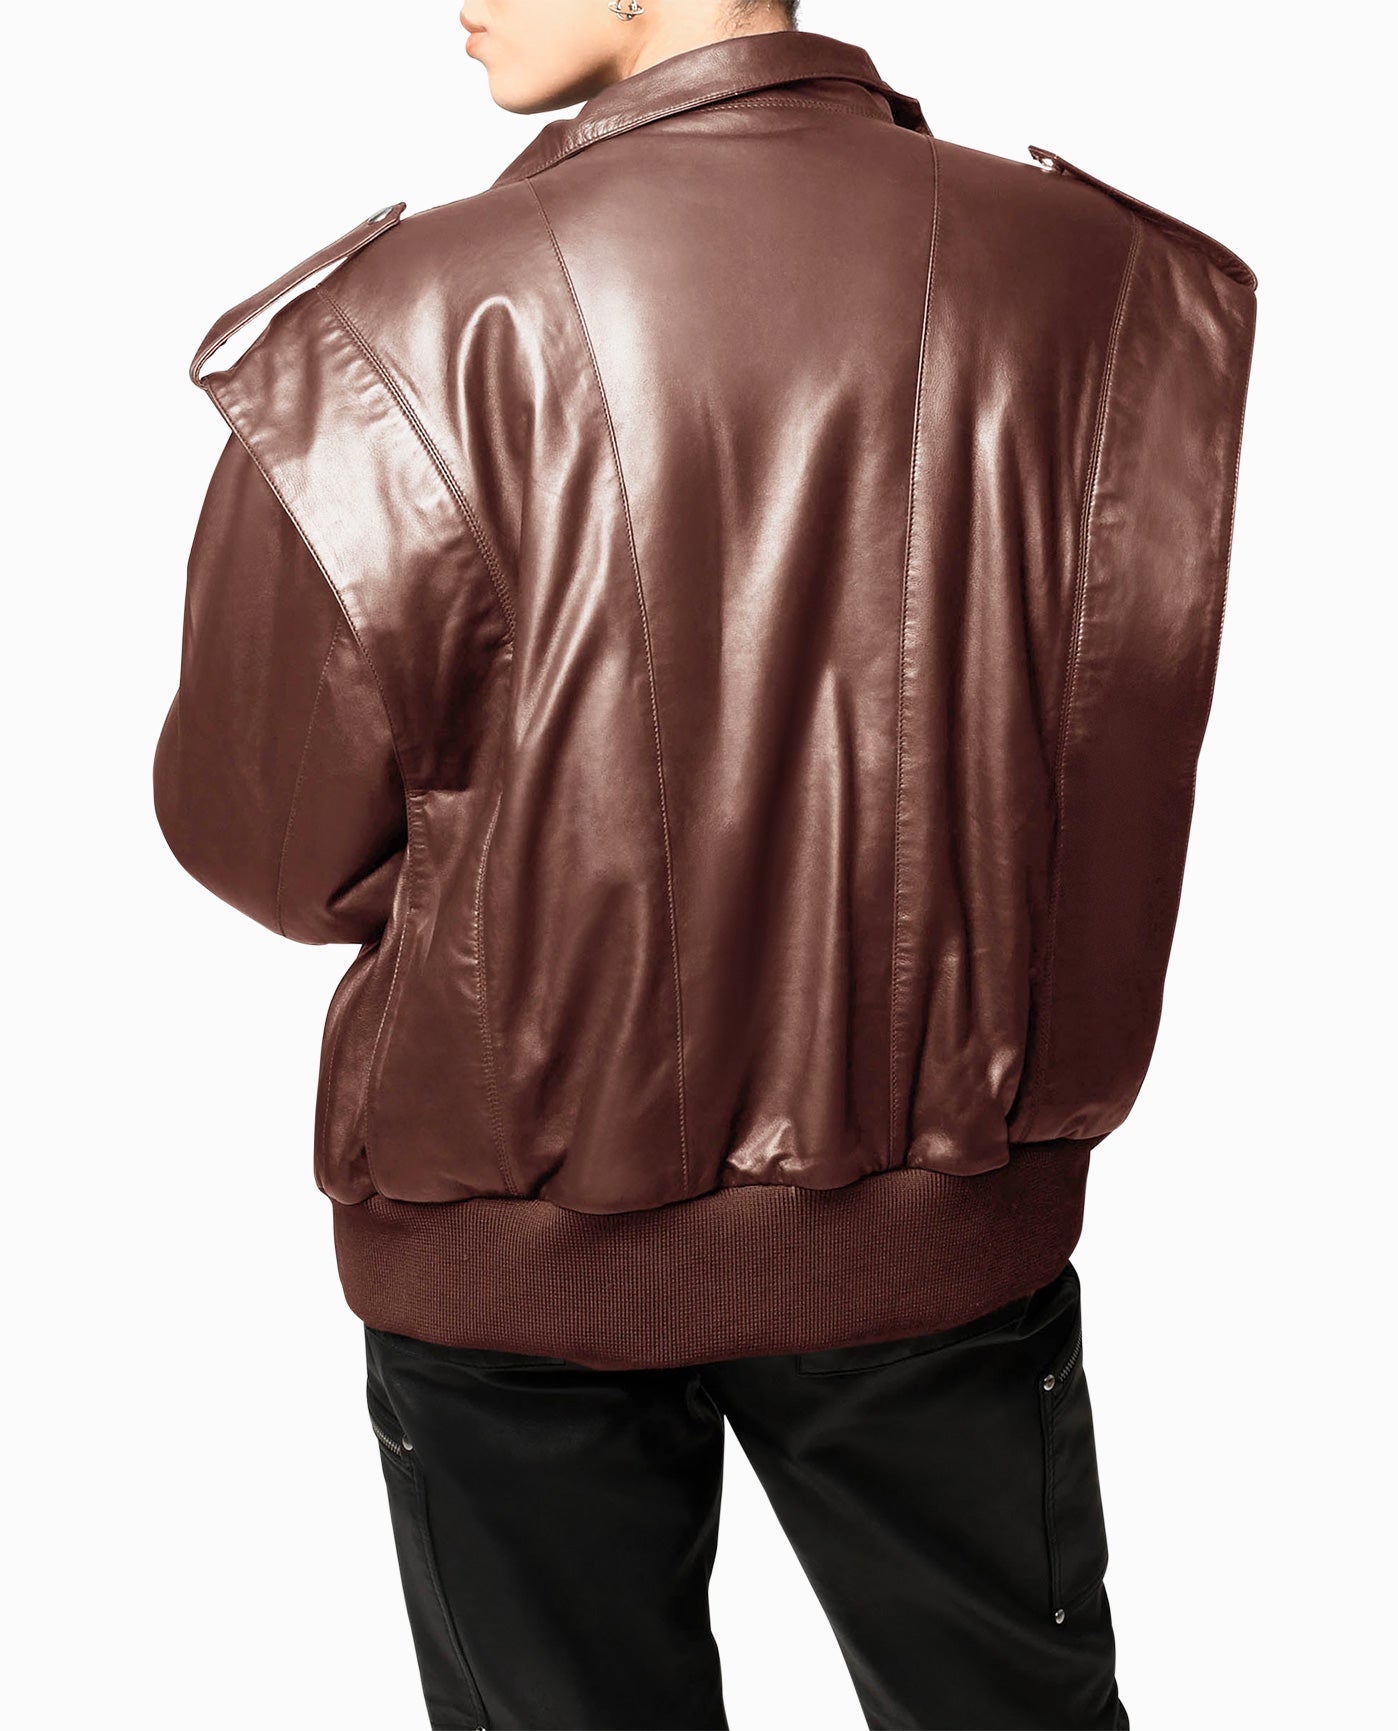 BACK OF LEATHER SPACE JACKET | BROWN